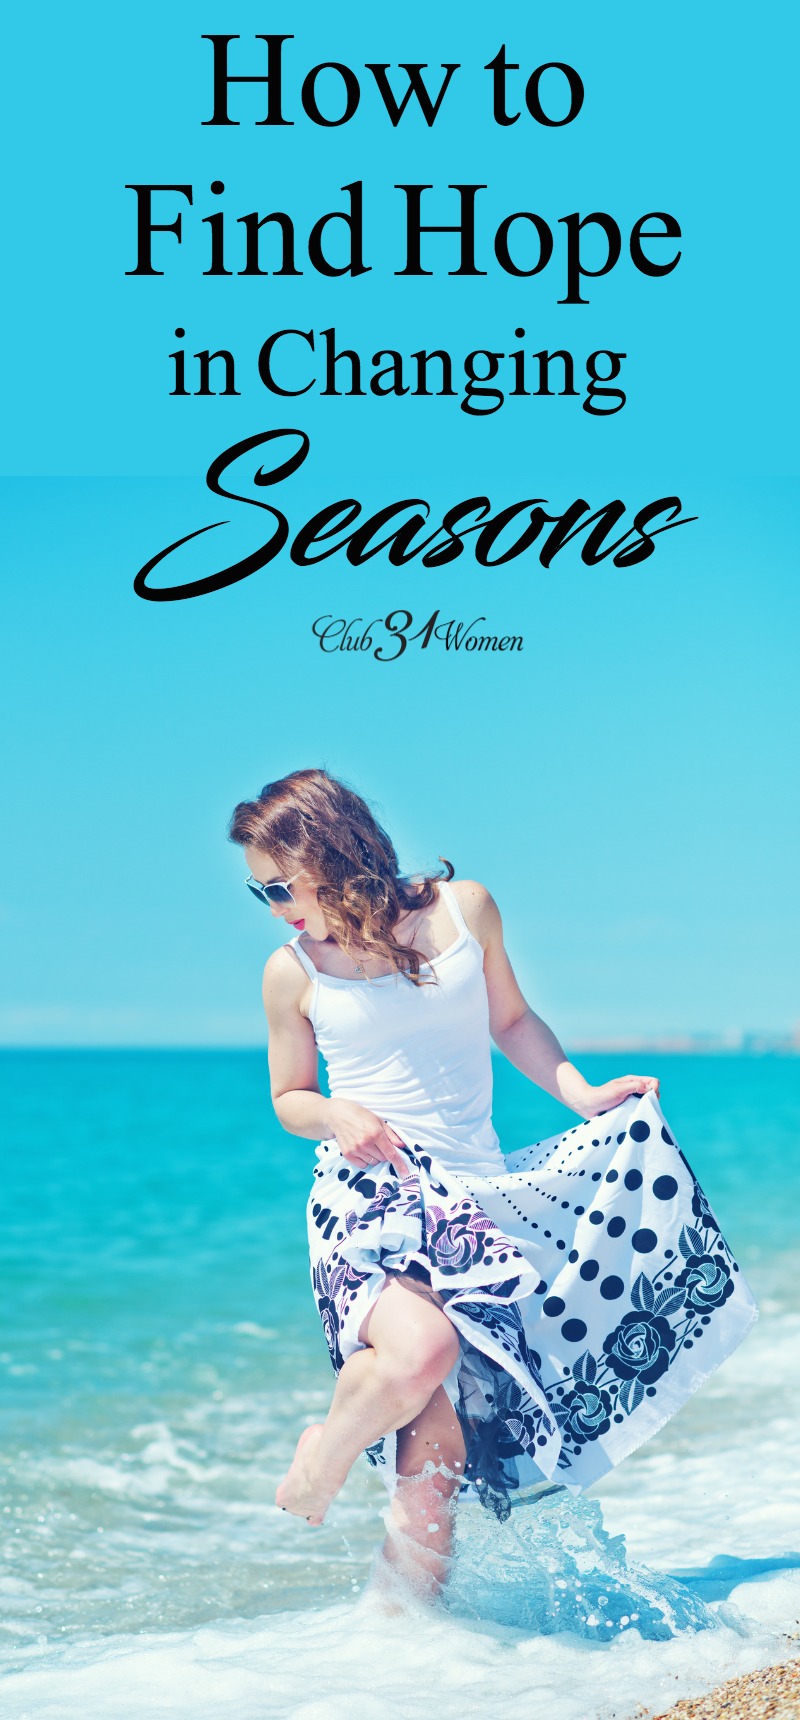 Different seasons bring different changes yet each with their own set of challenges. How can we cling to God in each season we face?  via @Club31Women